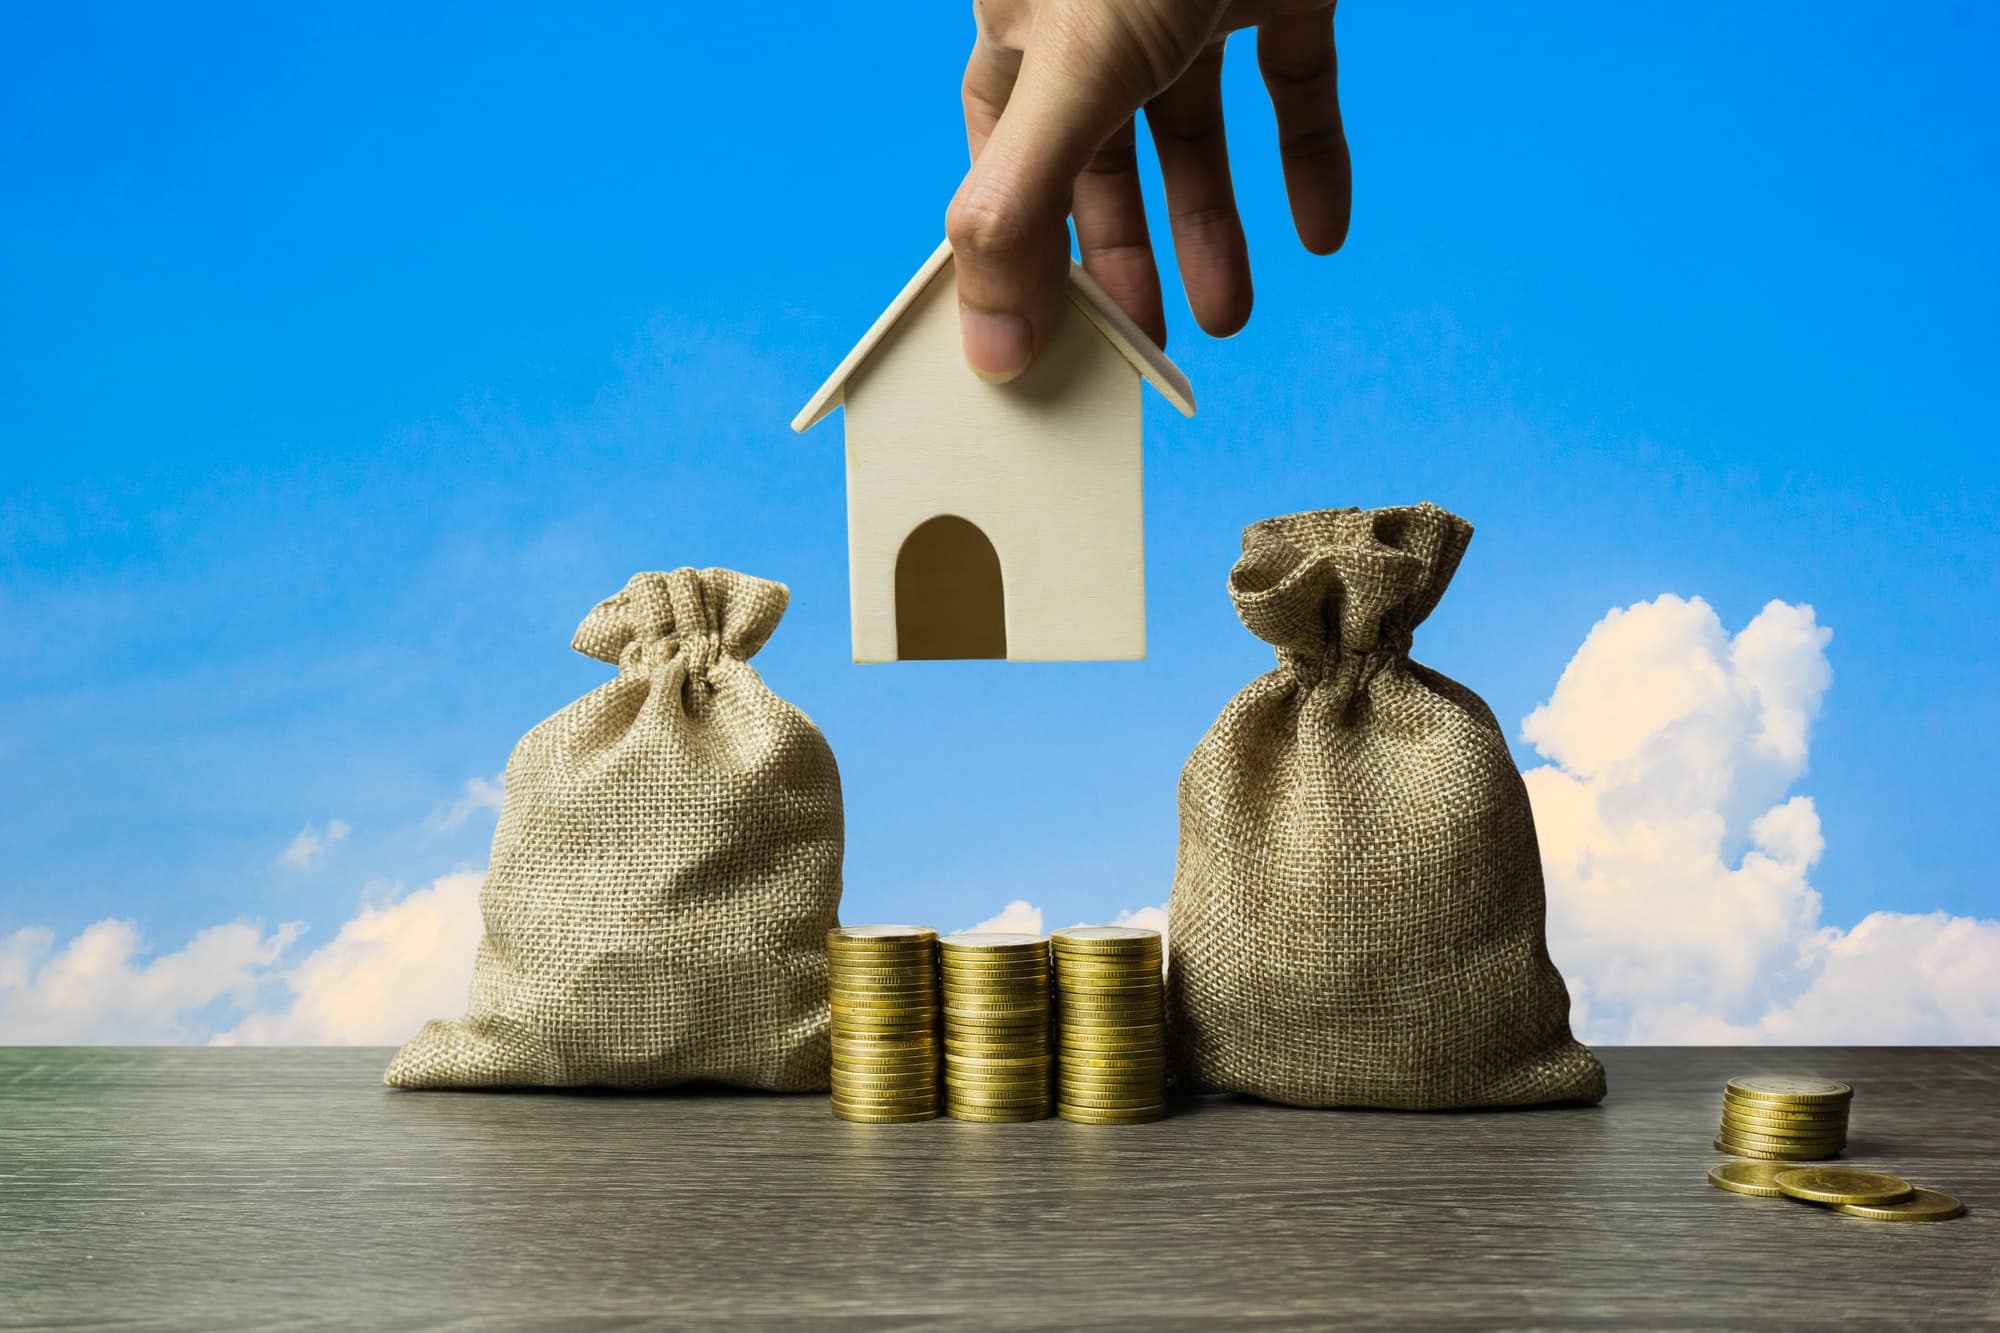 Saving Money, Home Loan, Mortgage, A Property Investment For Future Concept